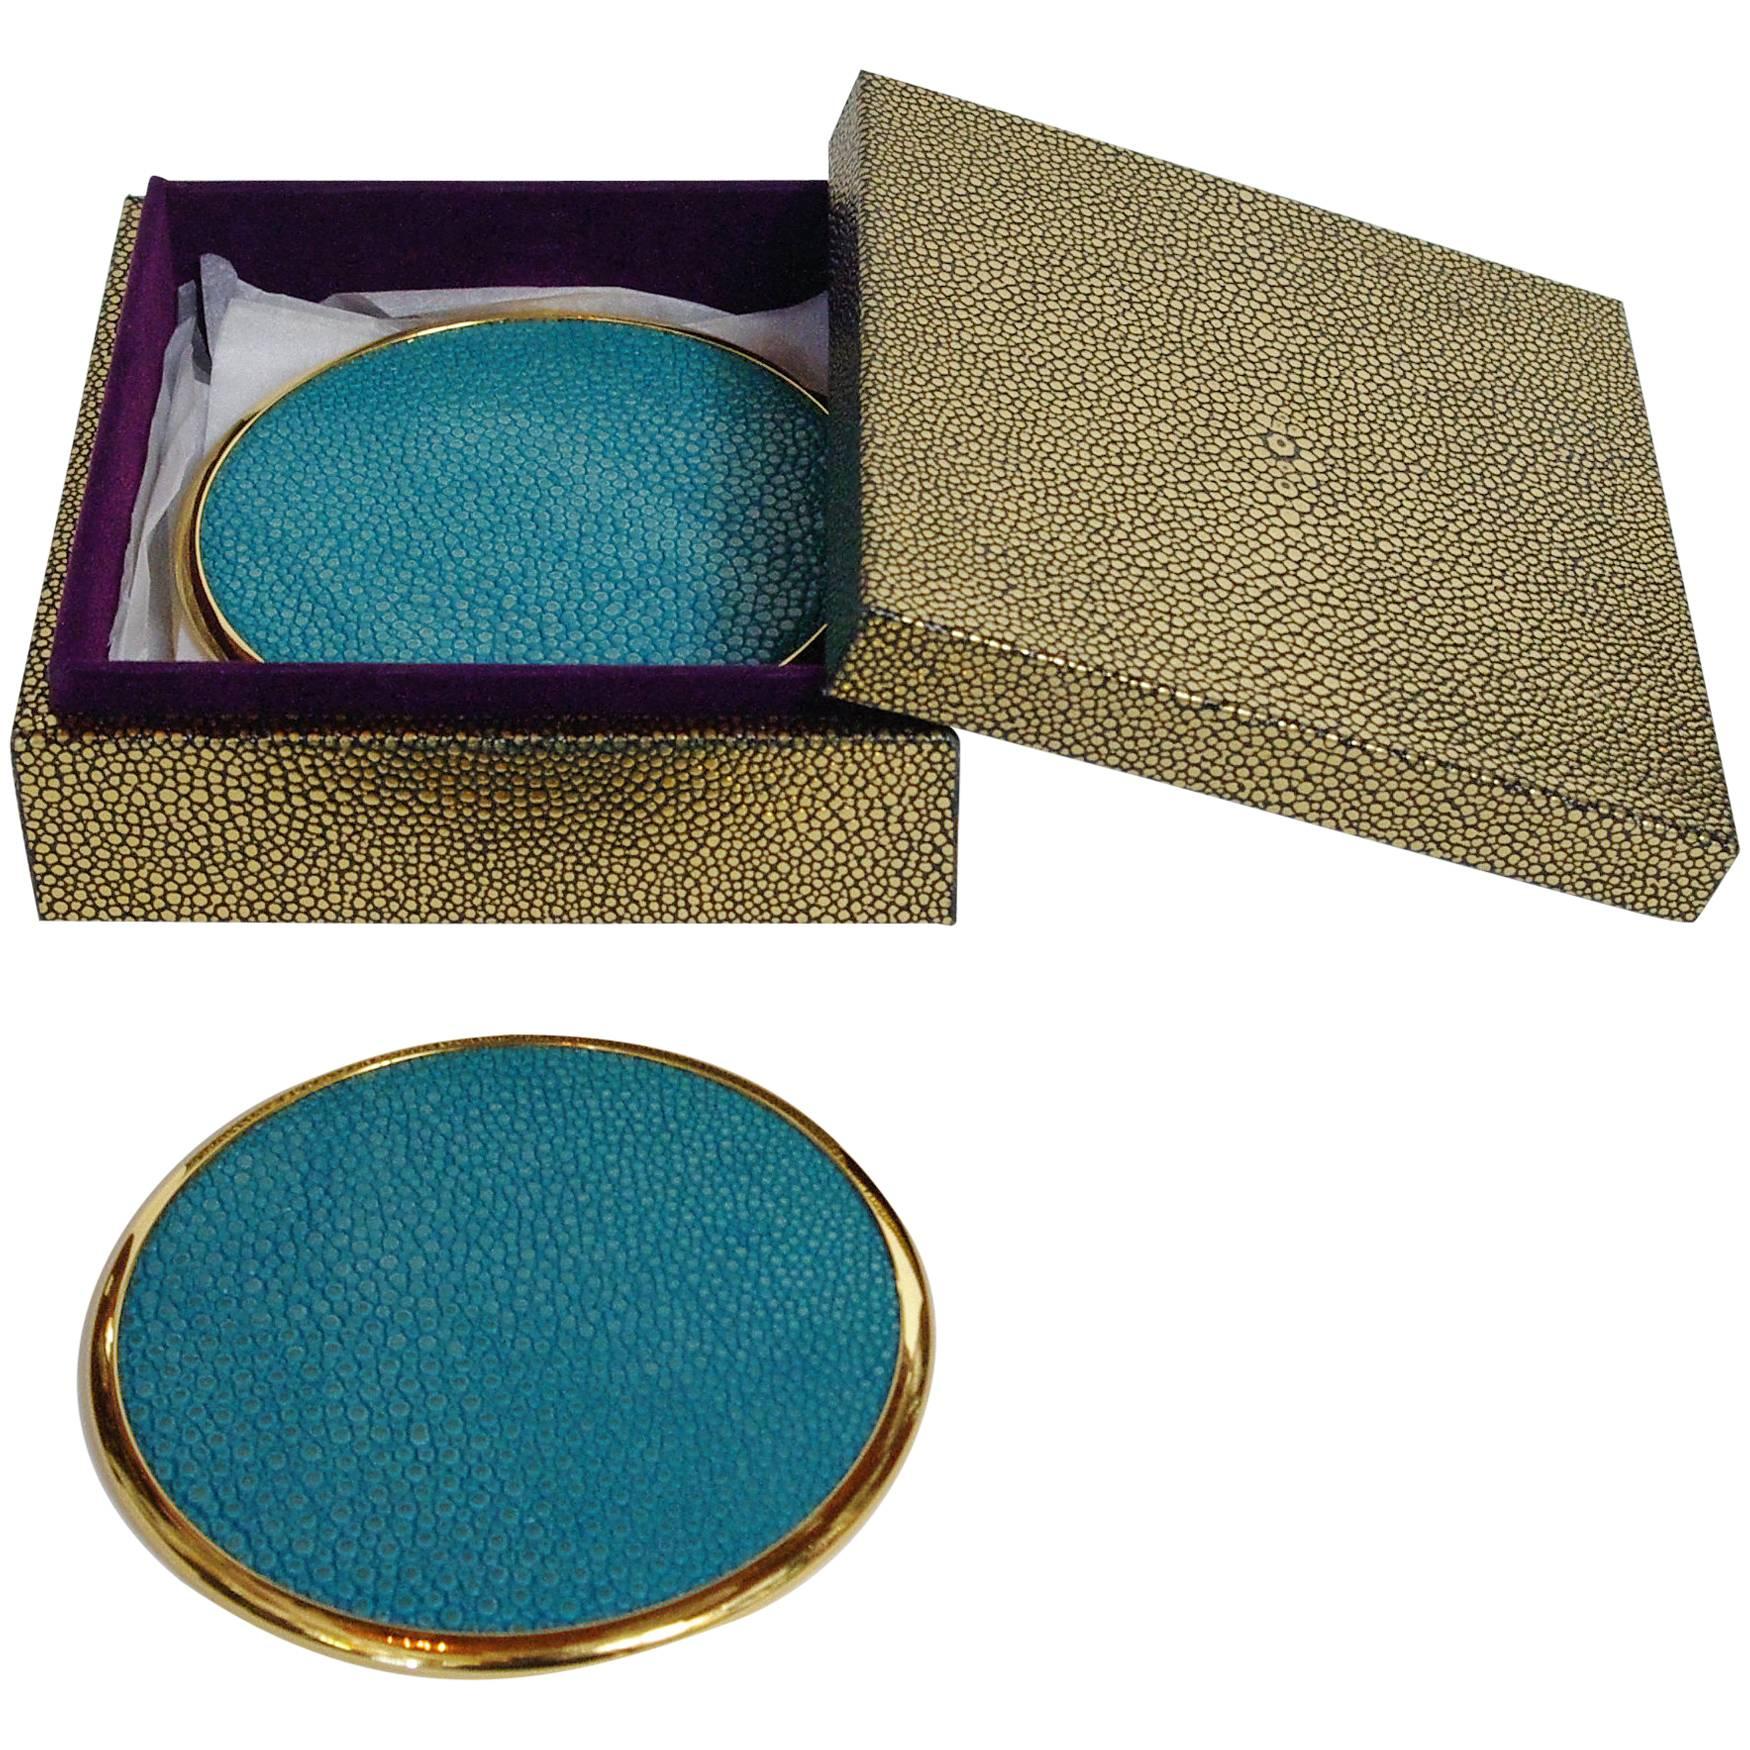 Set of Four-Piece Coasters with Turquoise Shagreen by Fabio Bergomi